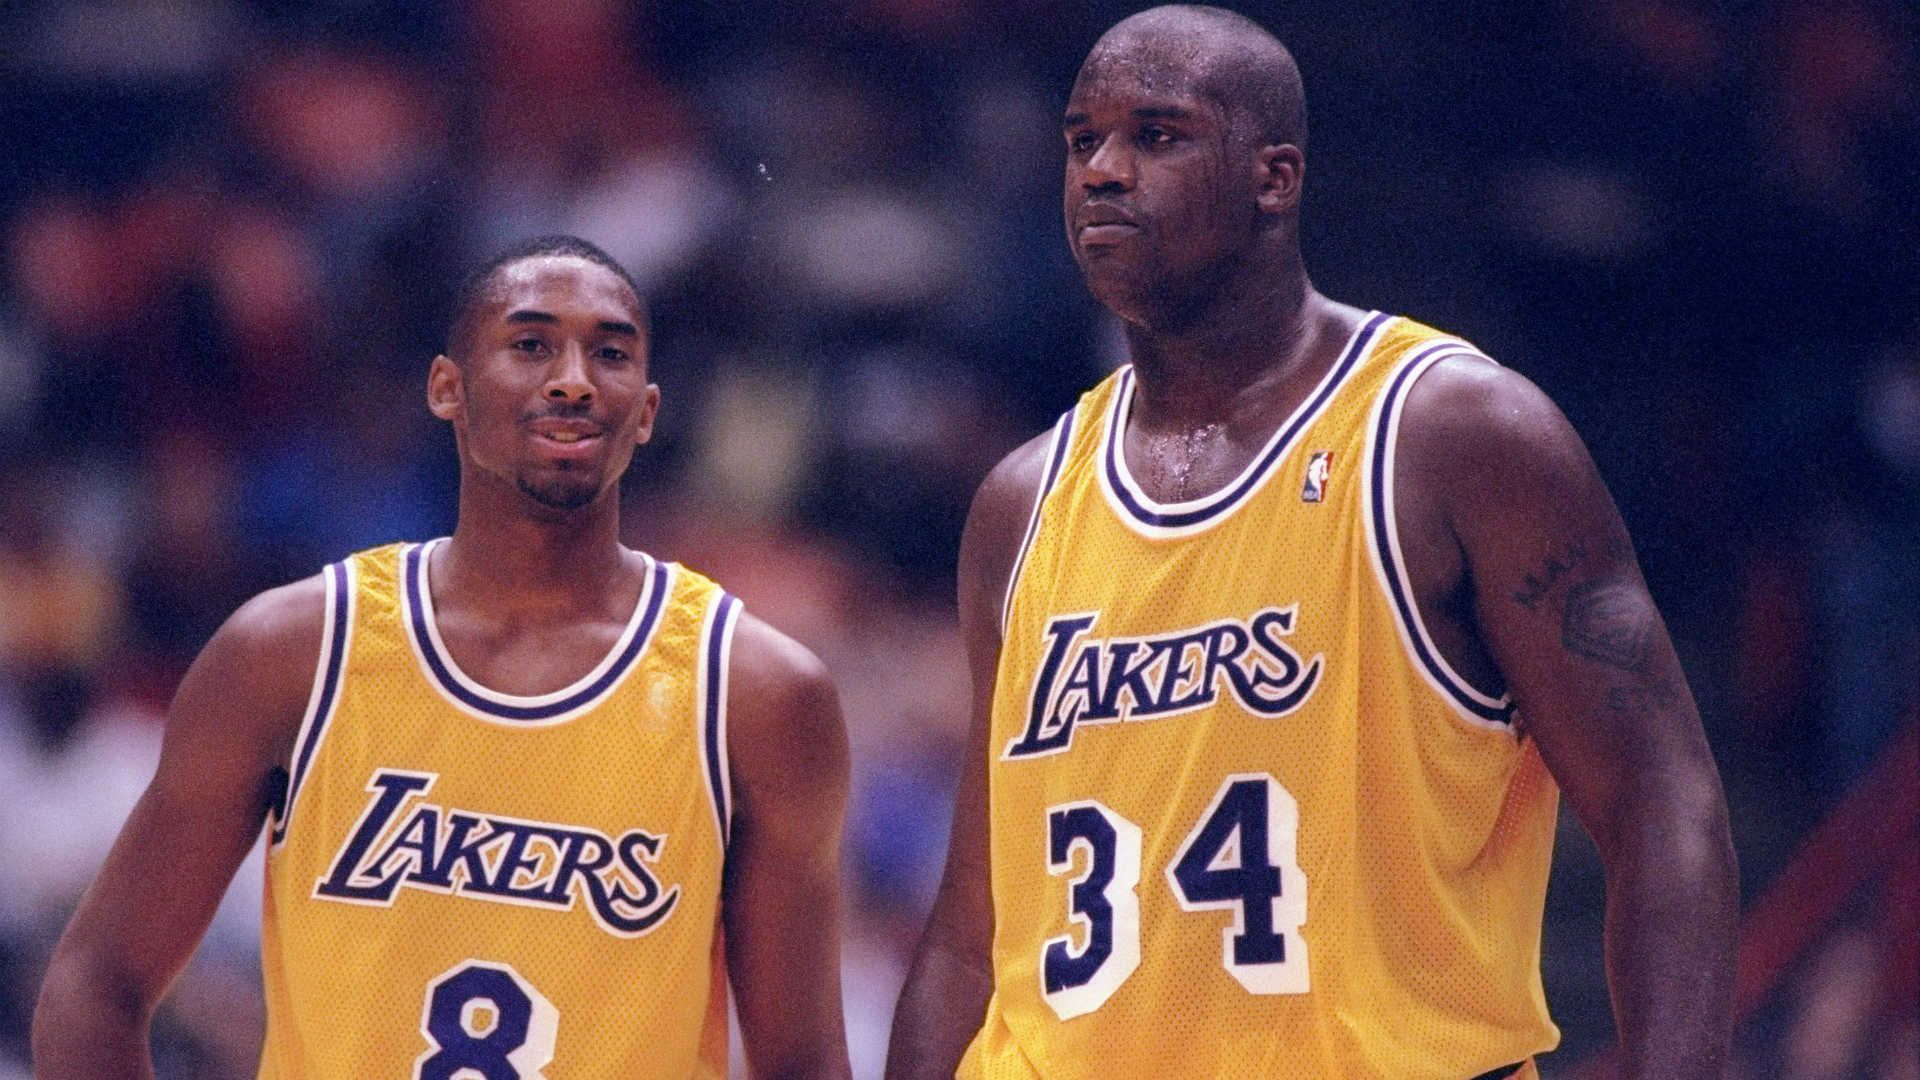 Kobe and Shaq get all sentimental: 'I know you don't hate me'